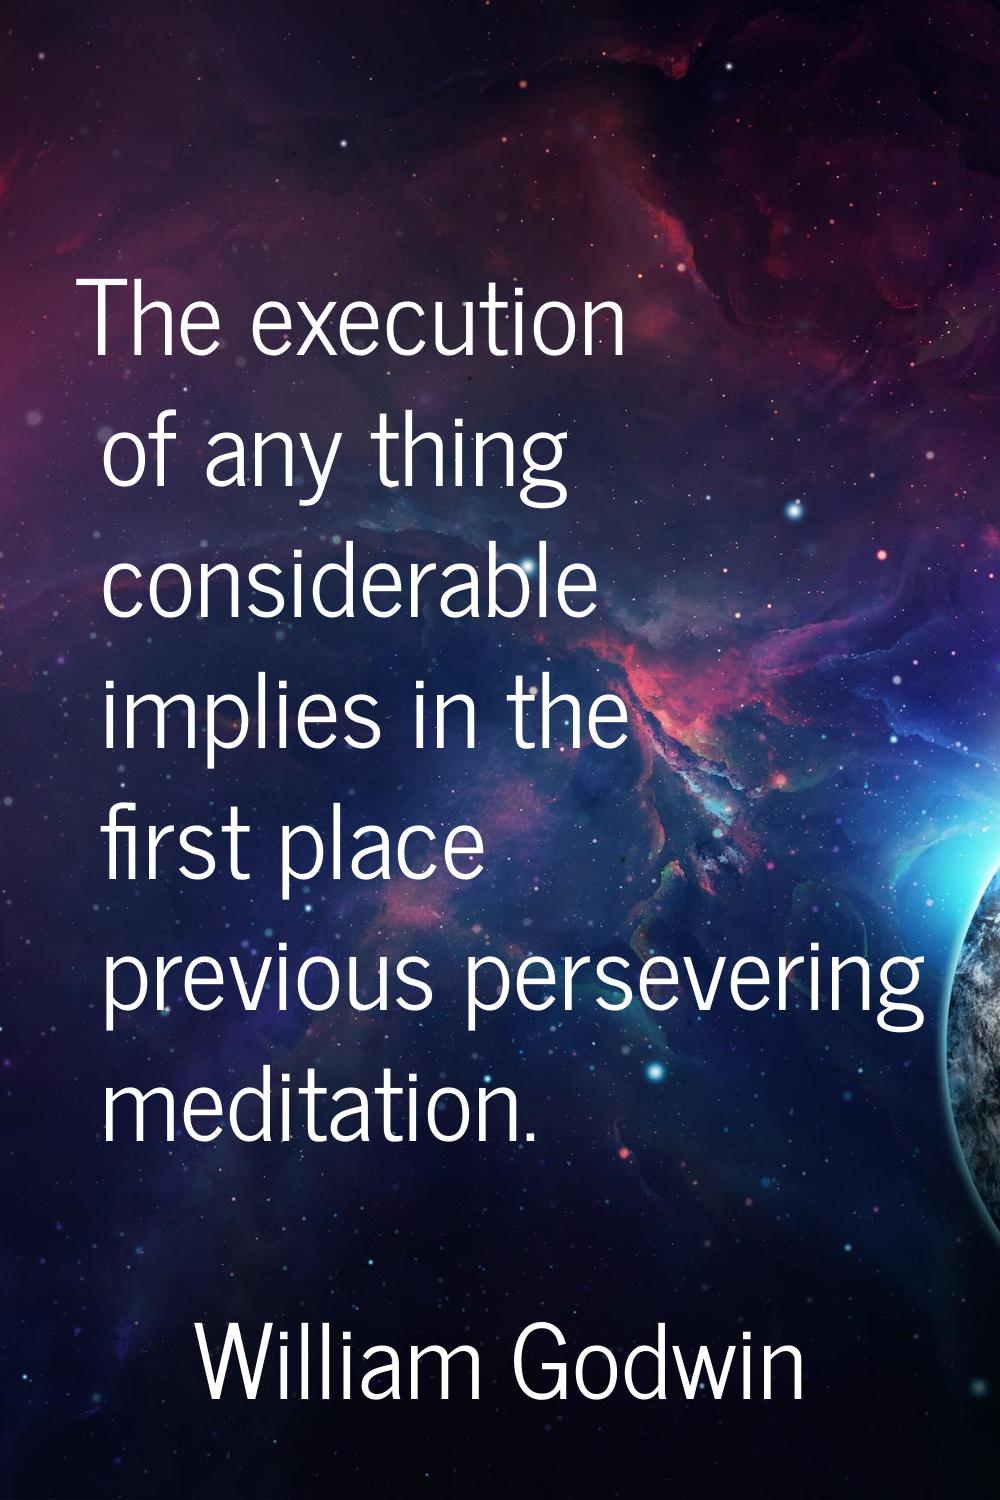 The execution of any thing considerable implies in the first place previous persevering meditation.